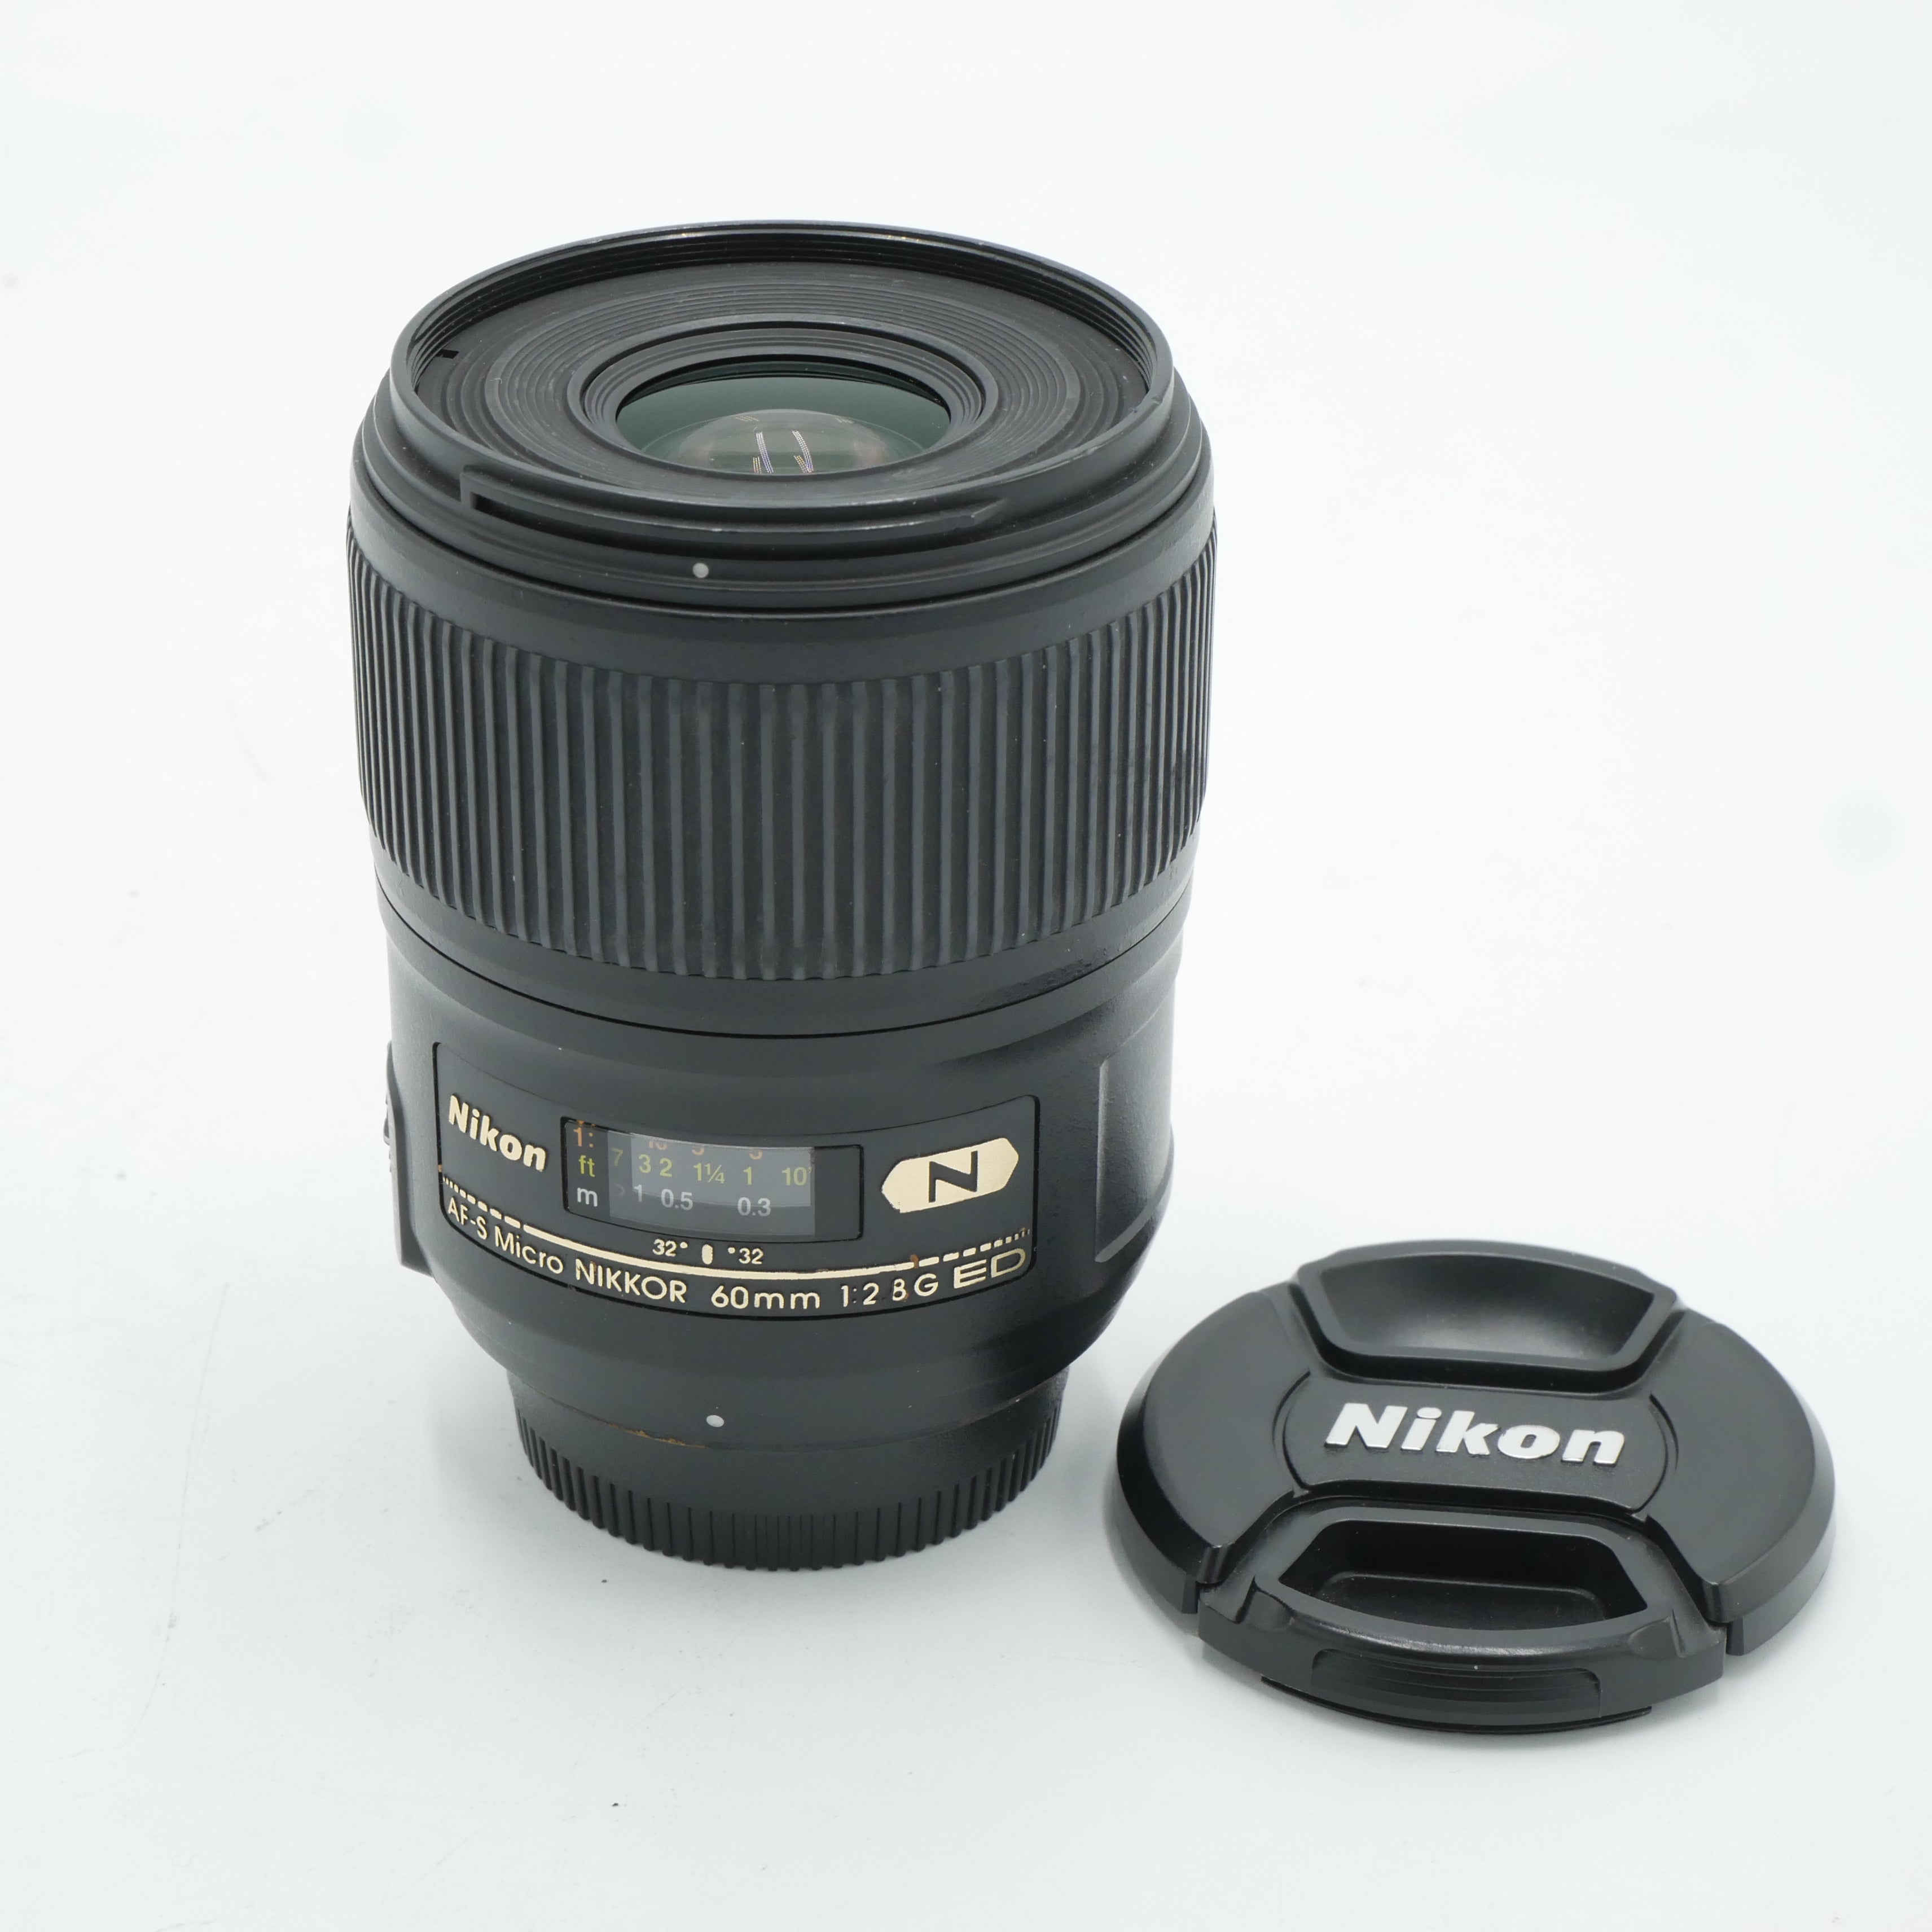 AF-S Micro NIKKOR 60mm F2.8G ED オマケ付きスマホ/家電/カメラ ...